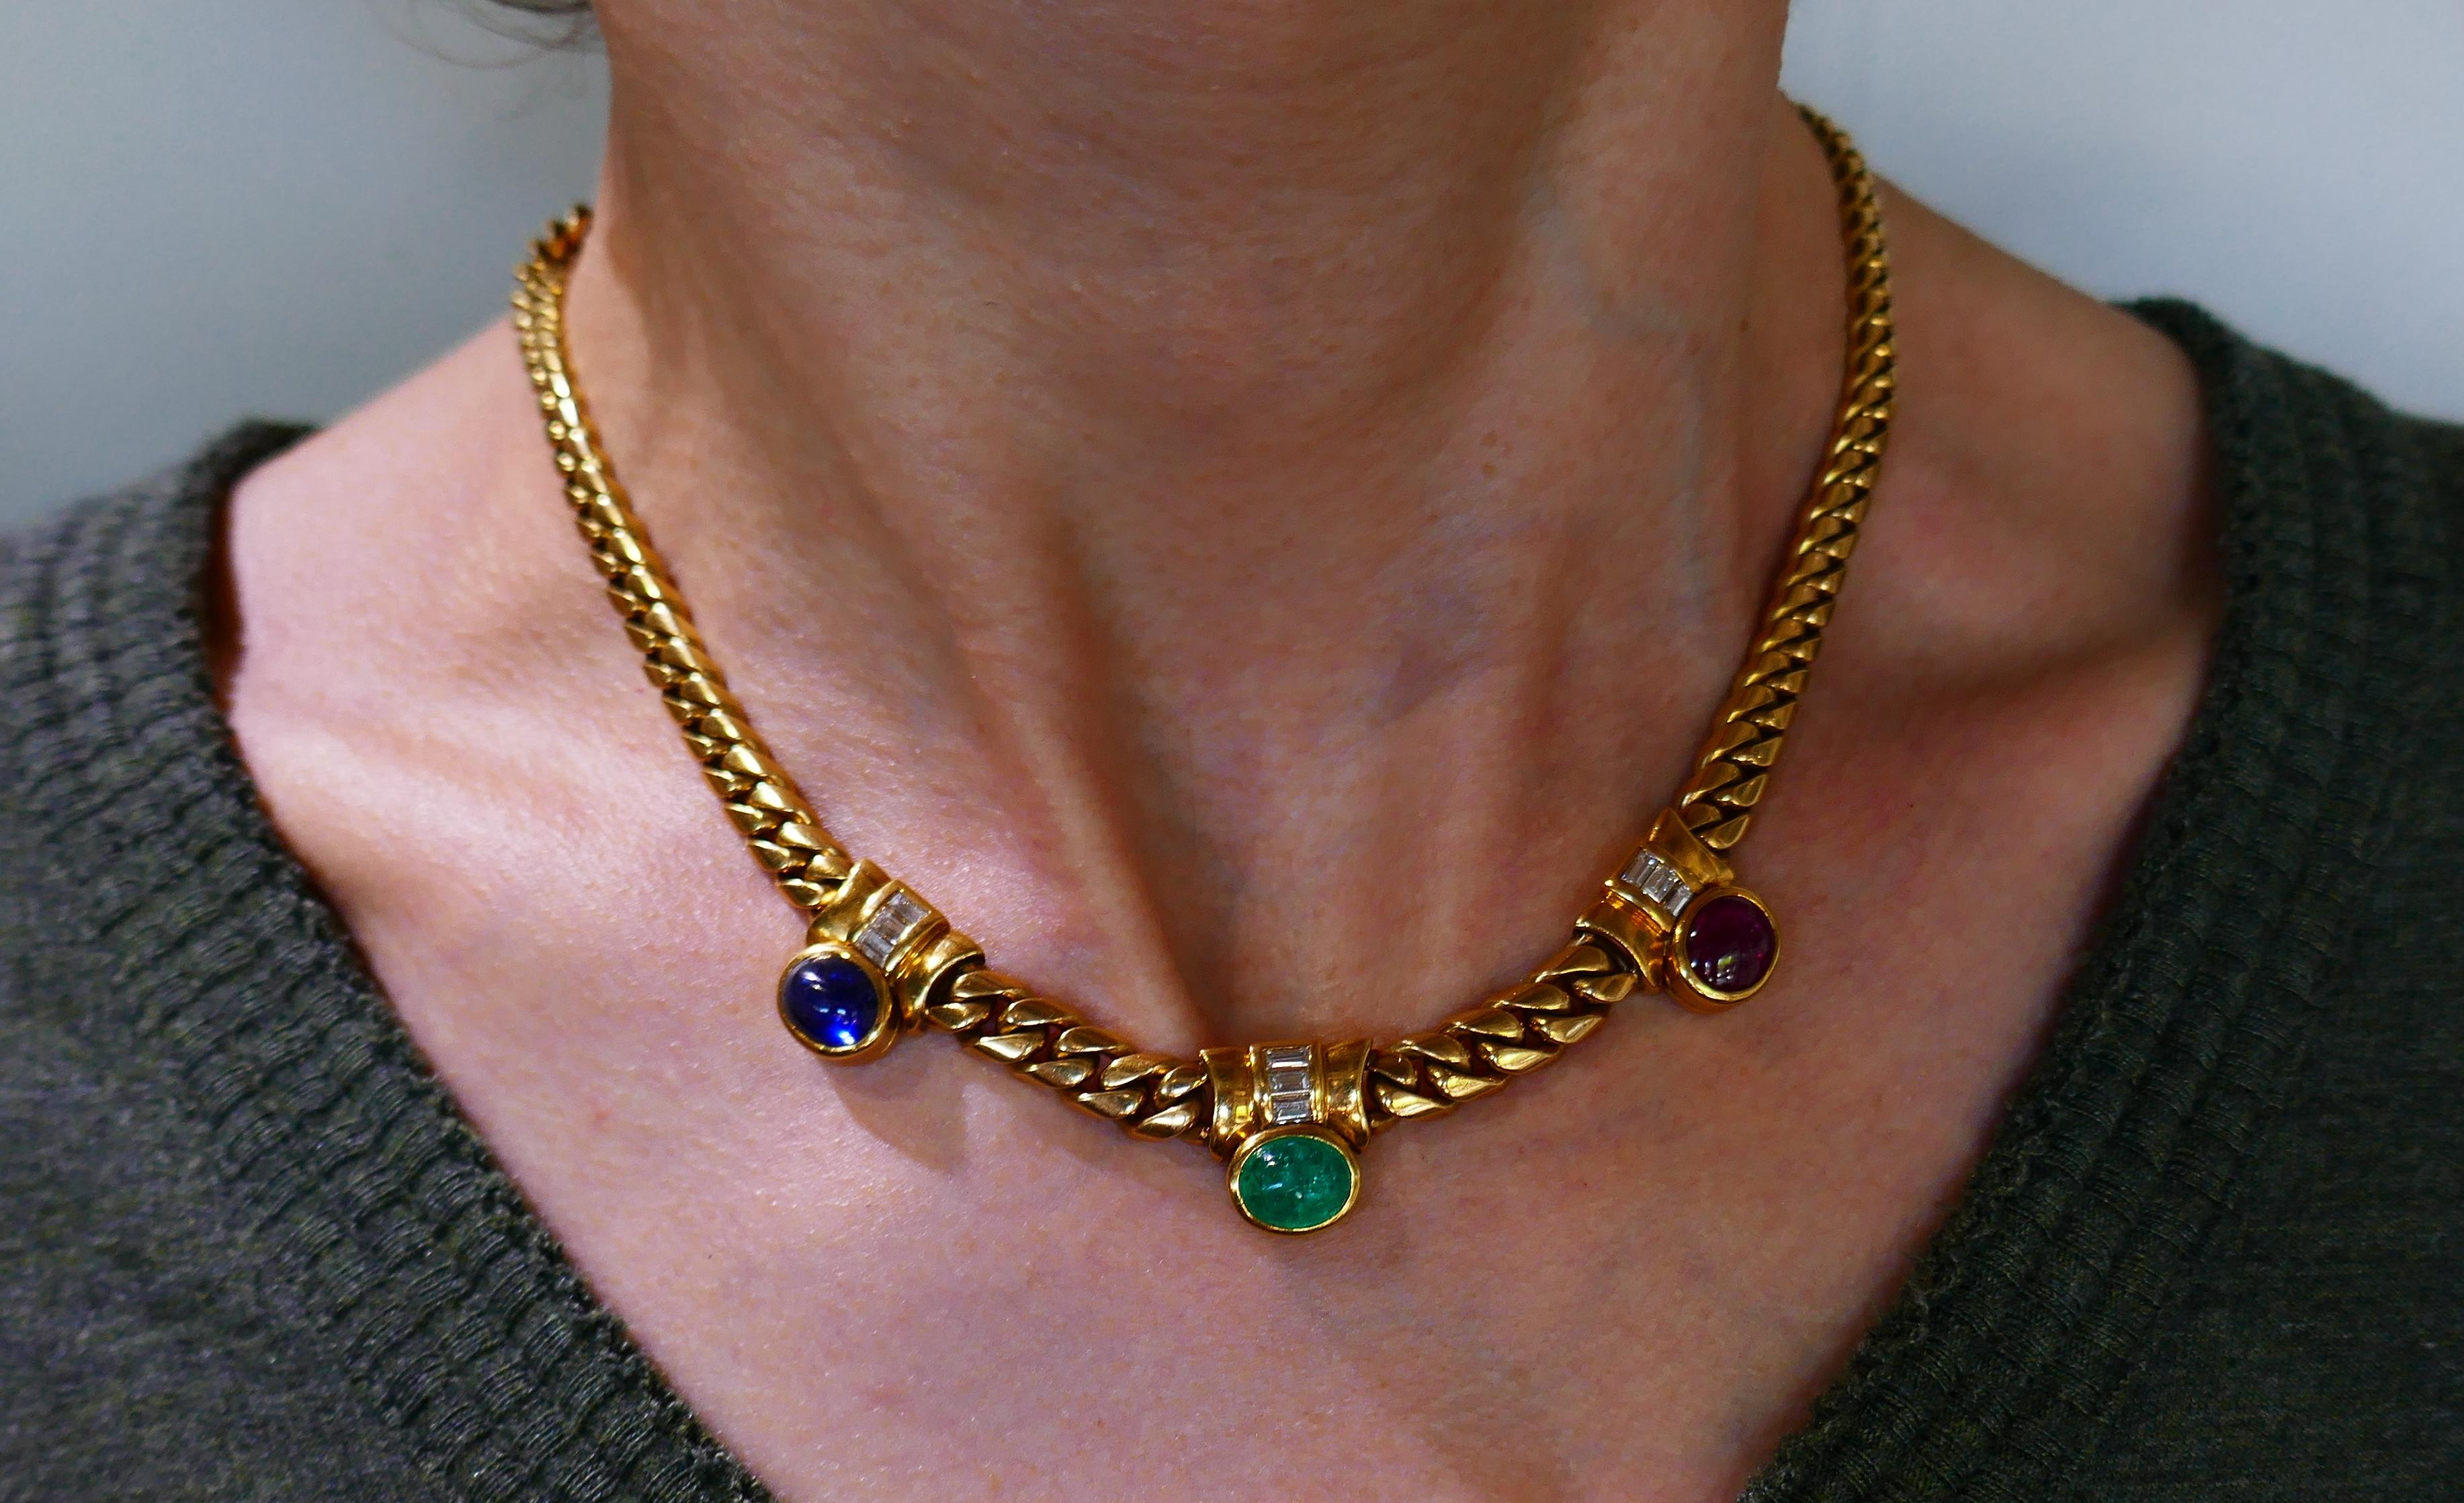 Elegant and stylish chain necklace created by Bulgari in Italy in the 1970s. Colorful and wearable, the necklace is a perfect choice for almost any outfit.
It is made of 18 karat yellow gold and set with cabochon ruby, emerald and sapphire. 
The